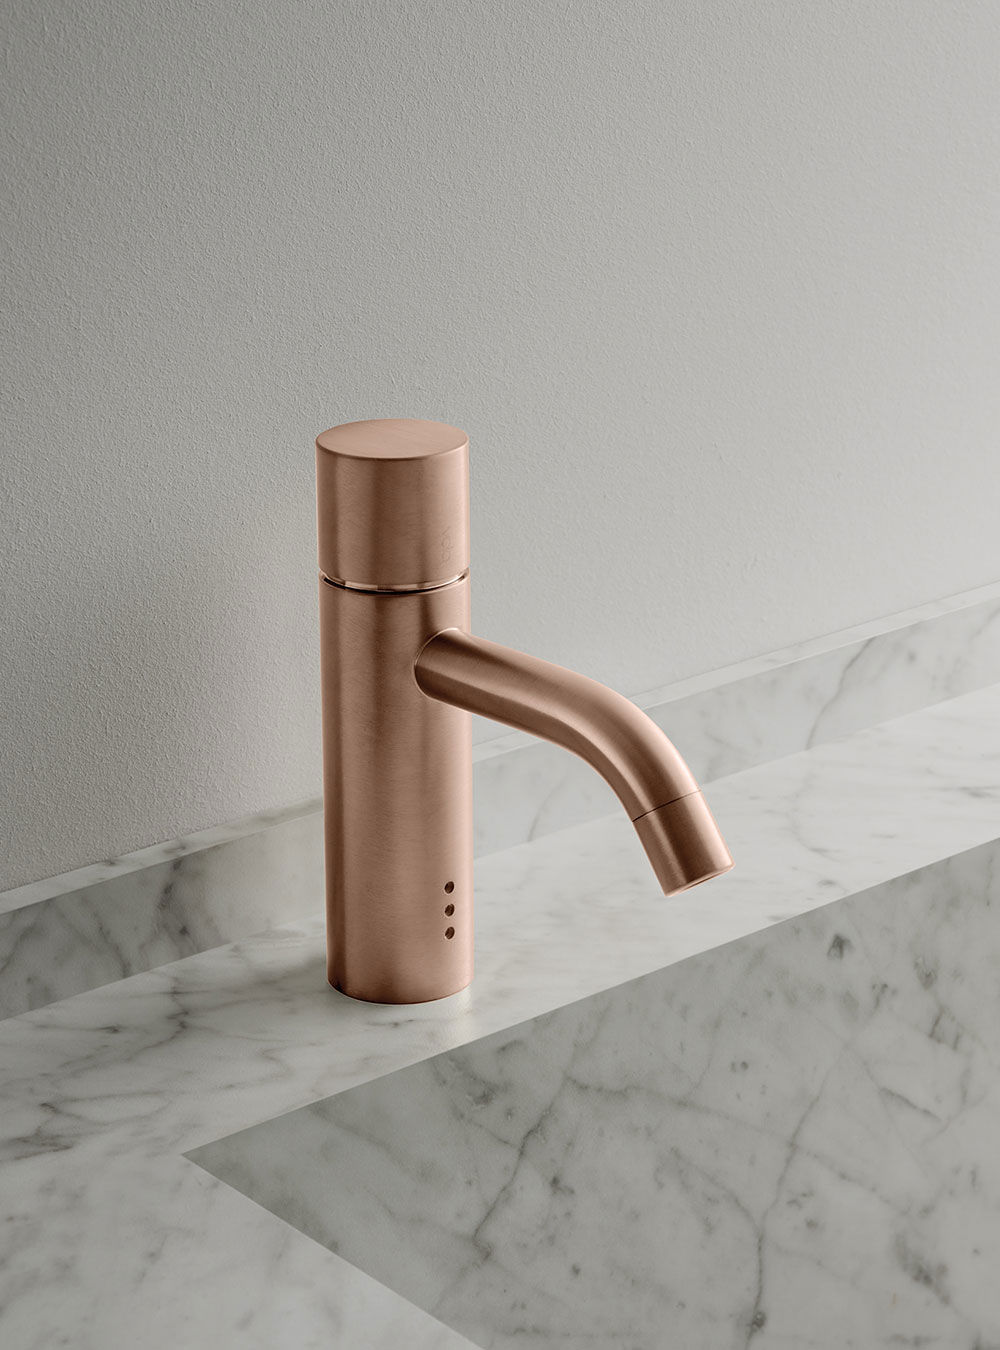 RB1E: Basin pillar tap with on-off sensor for ‘hands free’ operation.Height 150 mm.     RB1E comes complet